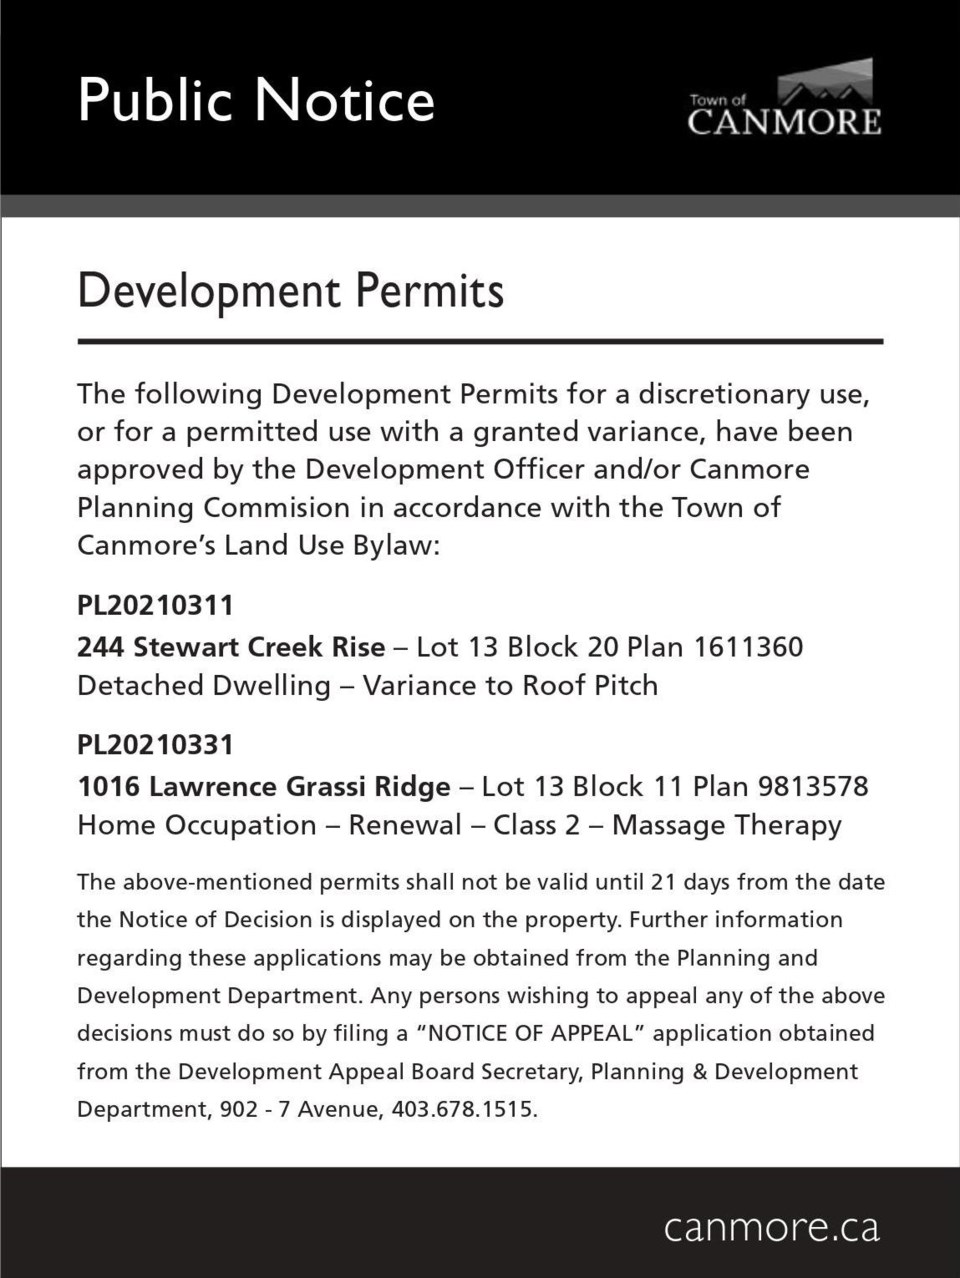 Public Notice – Sept. 30, 2021 – Town of Canmore development permits